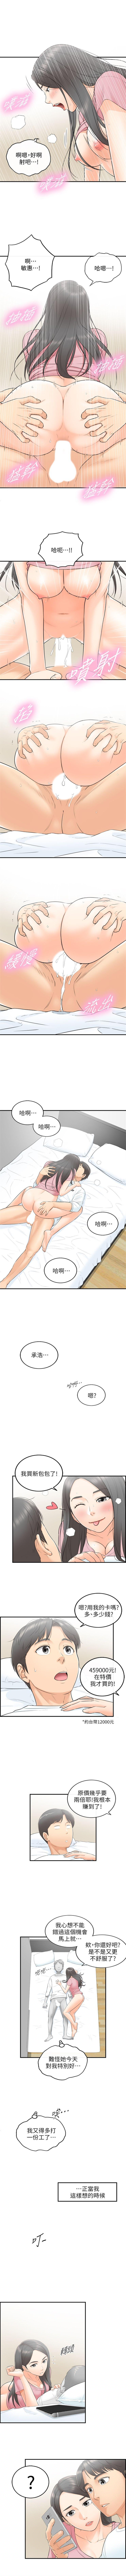 Spit 正妹小主管 1-68 官方中文（連載中） Doggy Style - Page 7